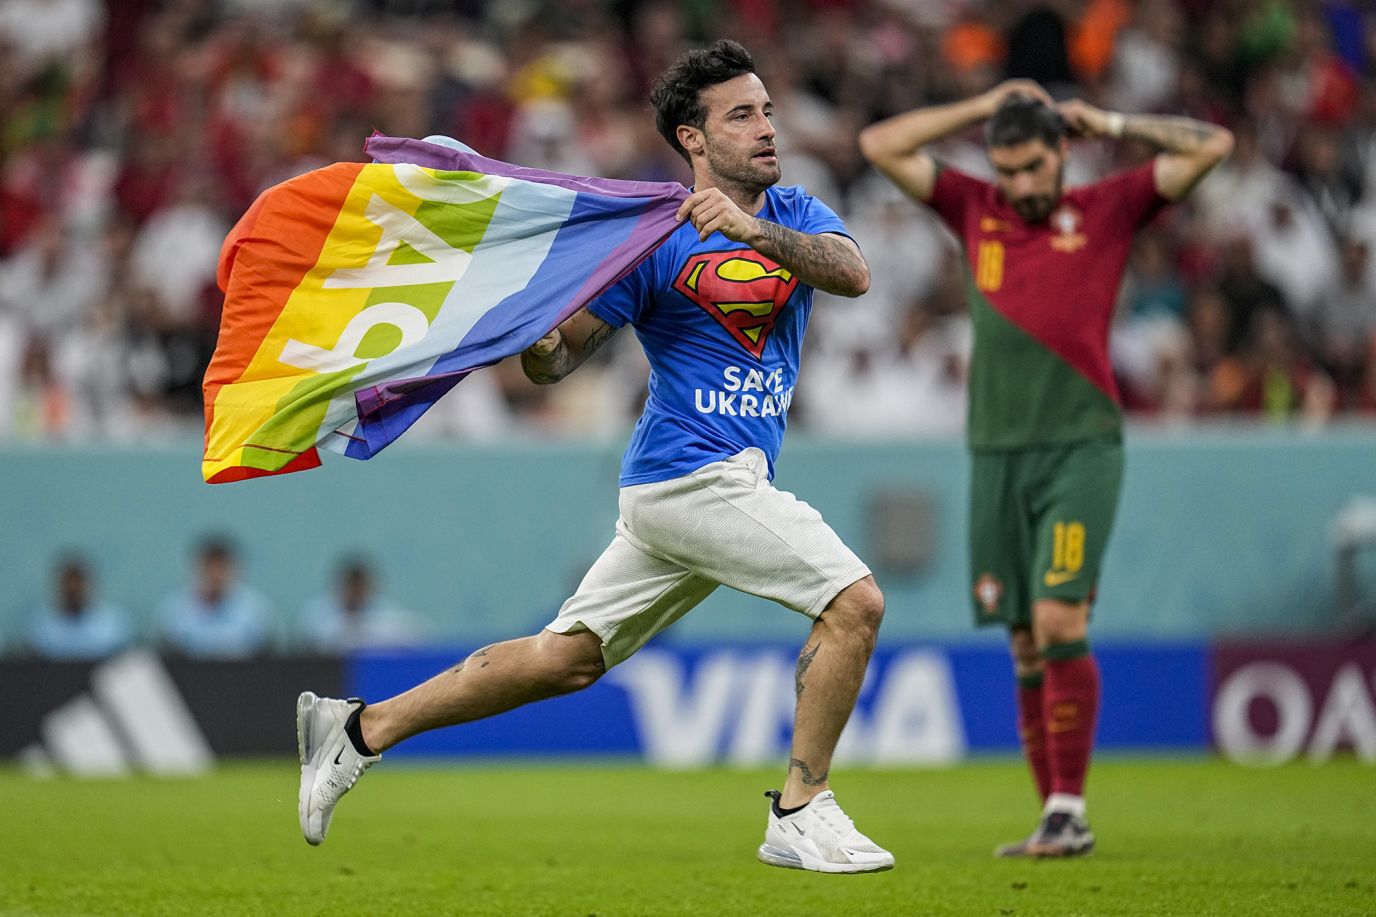 A <a href="https://www.cnn.com/2022/11/28/football/pitch-invader-rainbow-flag-2022-world-cup-spt-intl/index.html" target="_blank">pitch invader </a>runs across the field with a rainbow flag during the match between Portugal and Uruguay on Monday. The issue of LGBTQ rights in Qatar has been a constant theme at this year's World Cup.